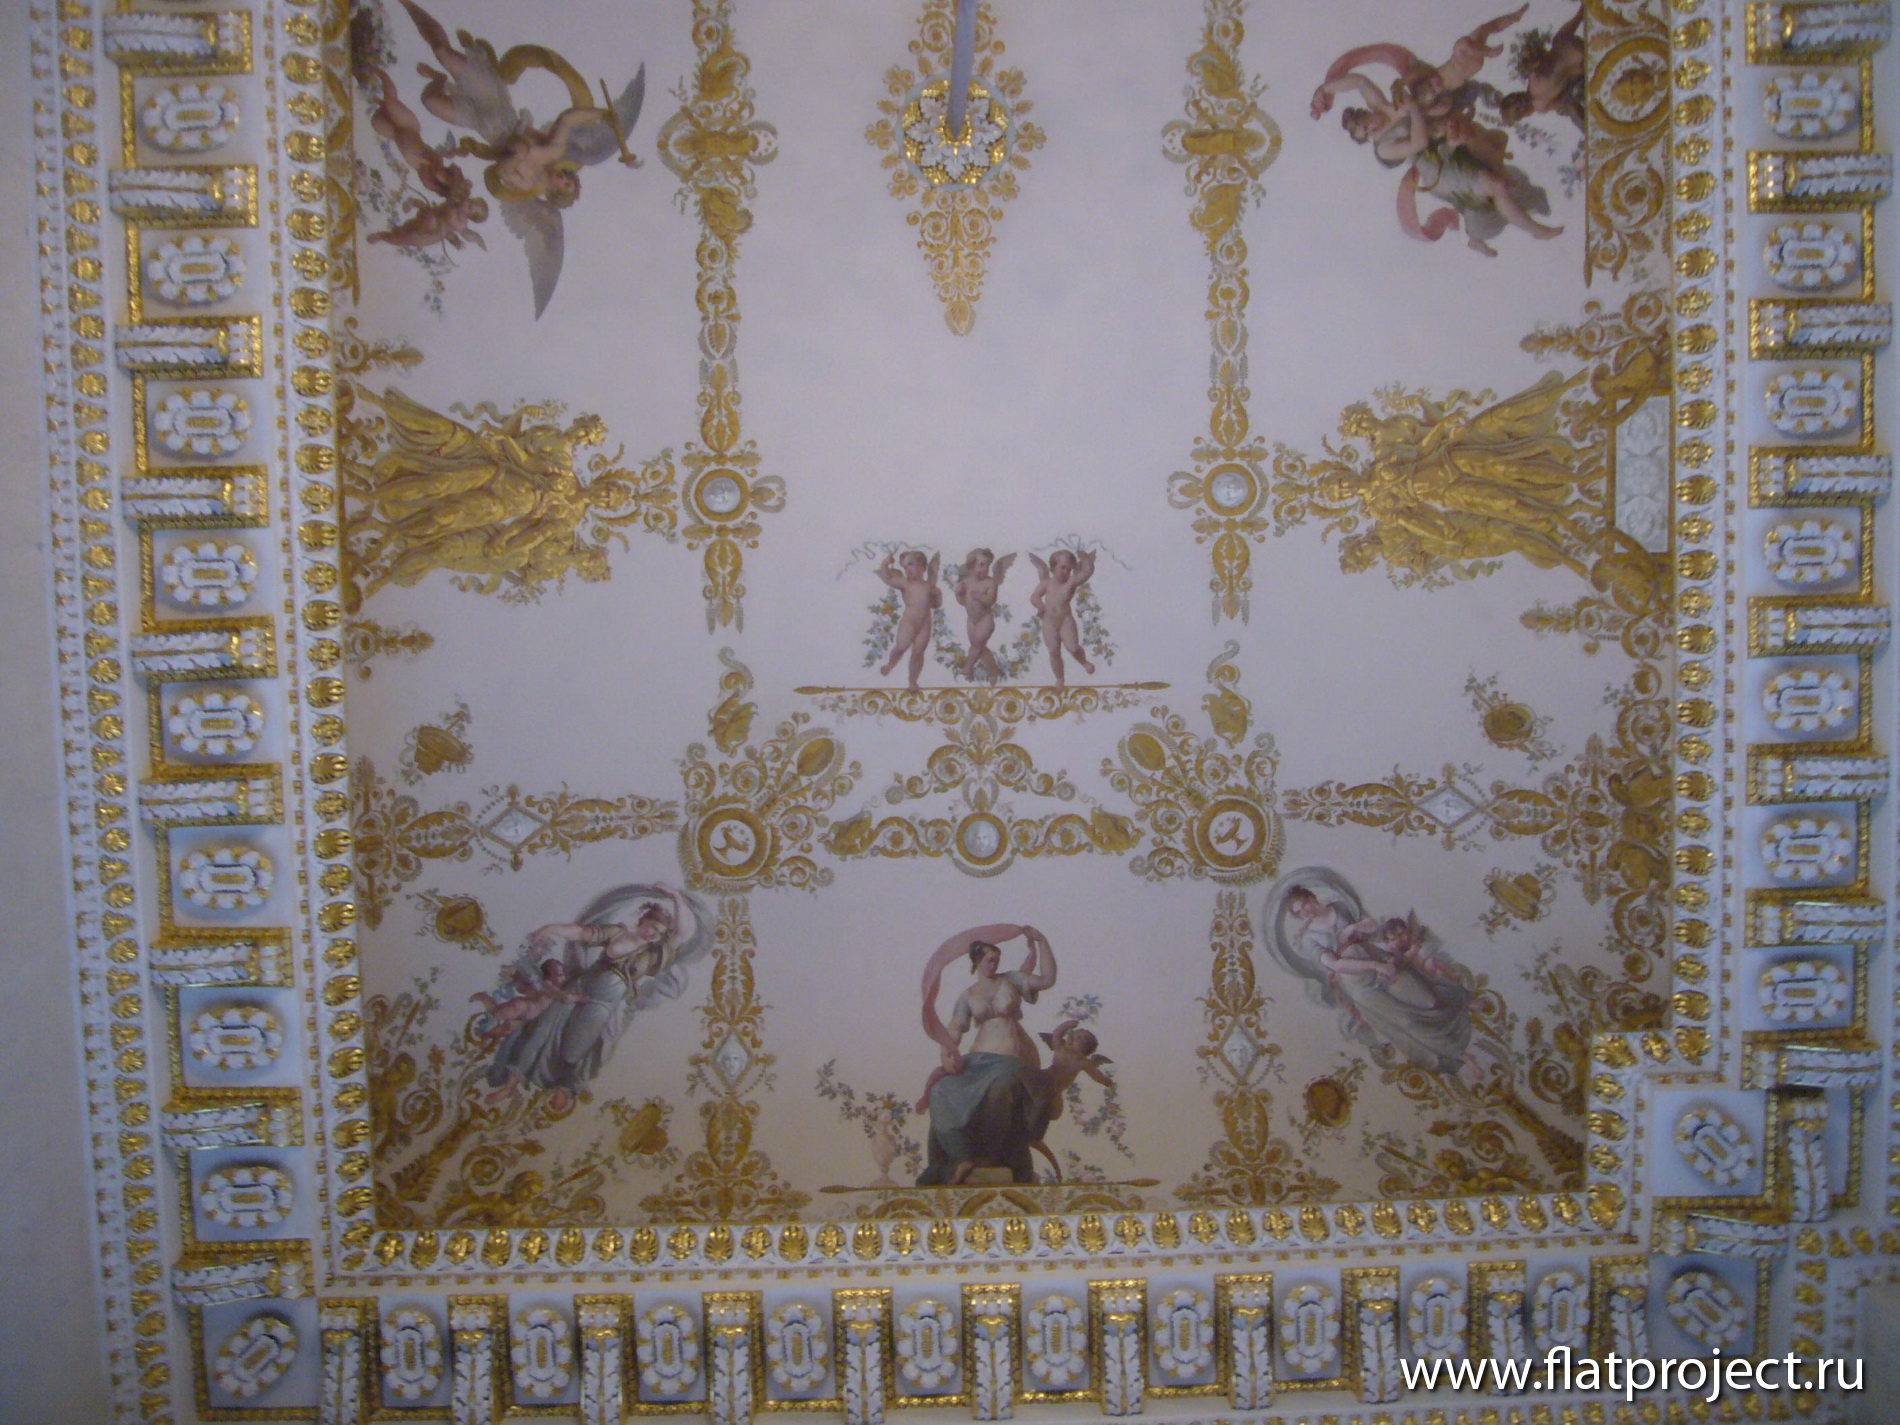 The State Russian museum interiors – photo 111